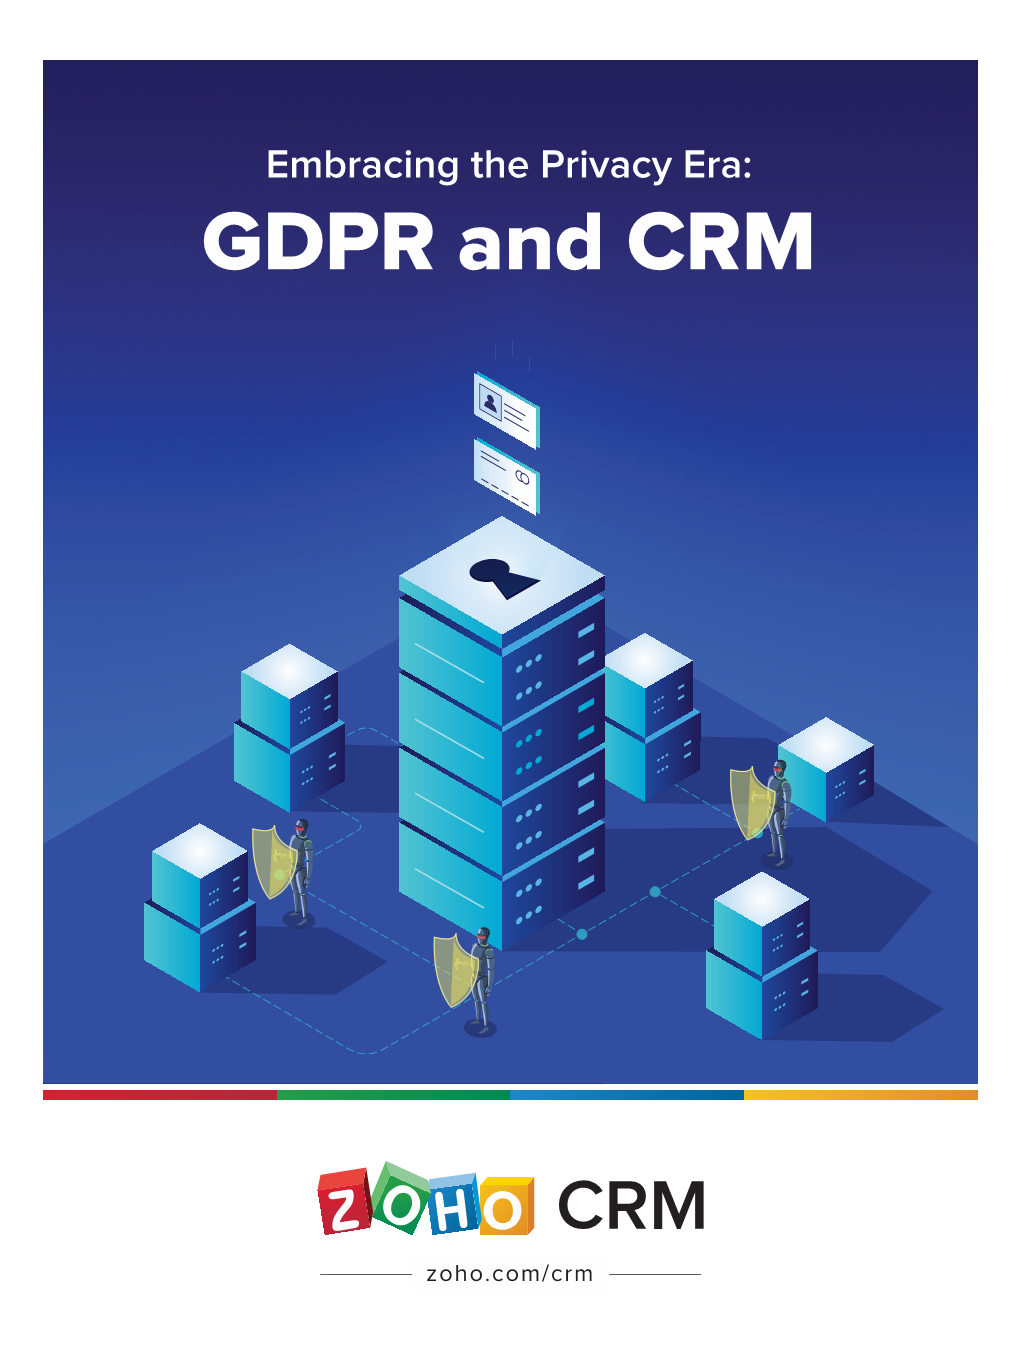 Embracing the Privacy Era: GDPR and CRM